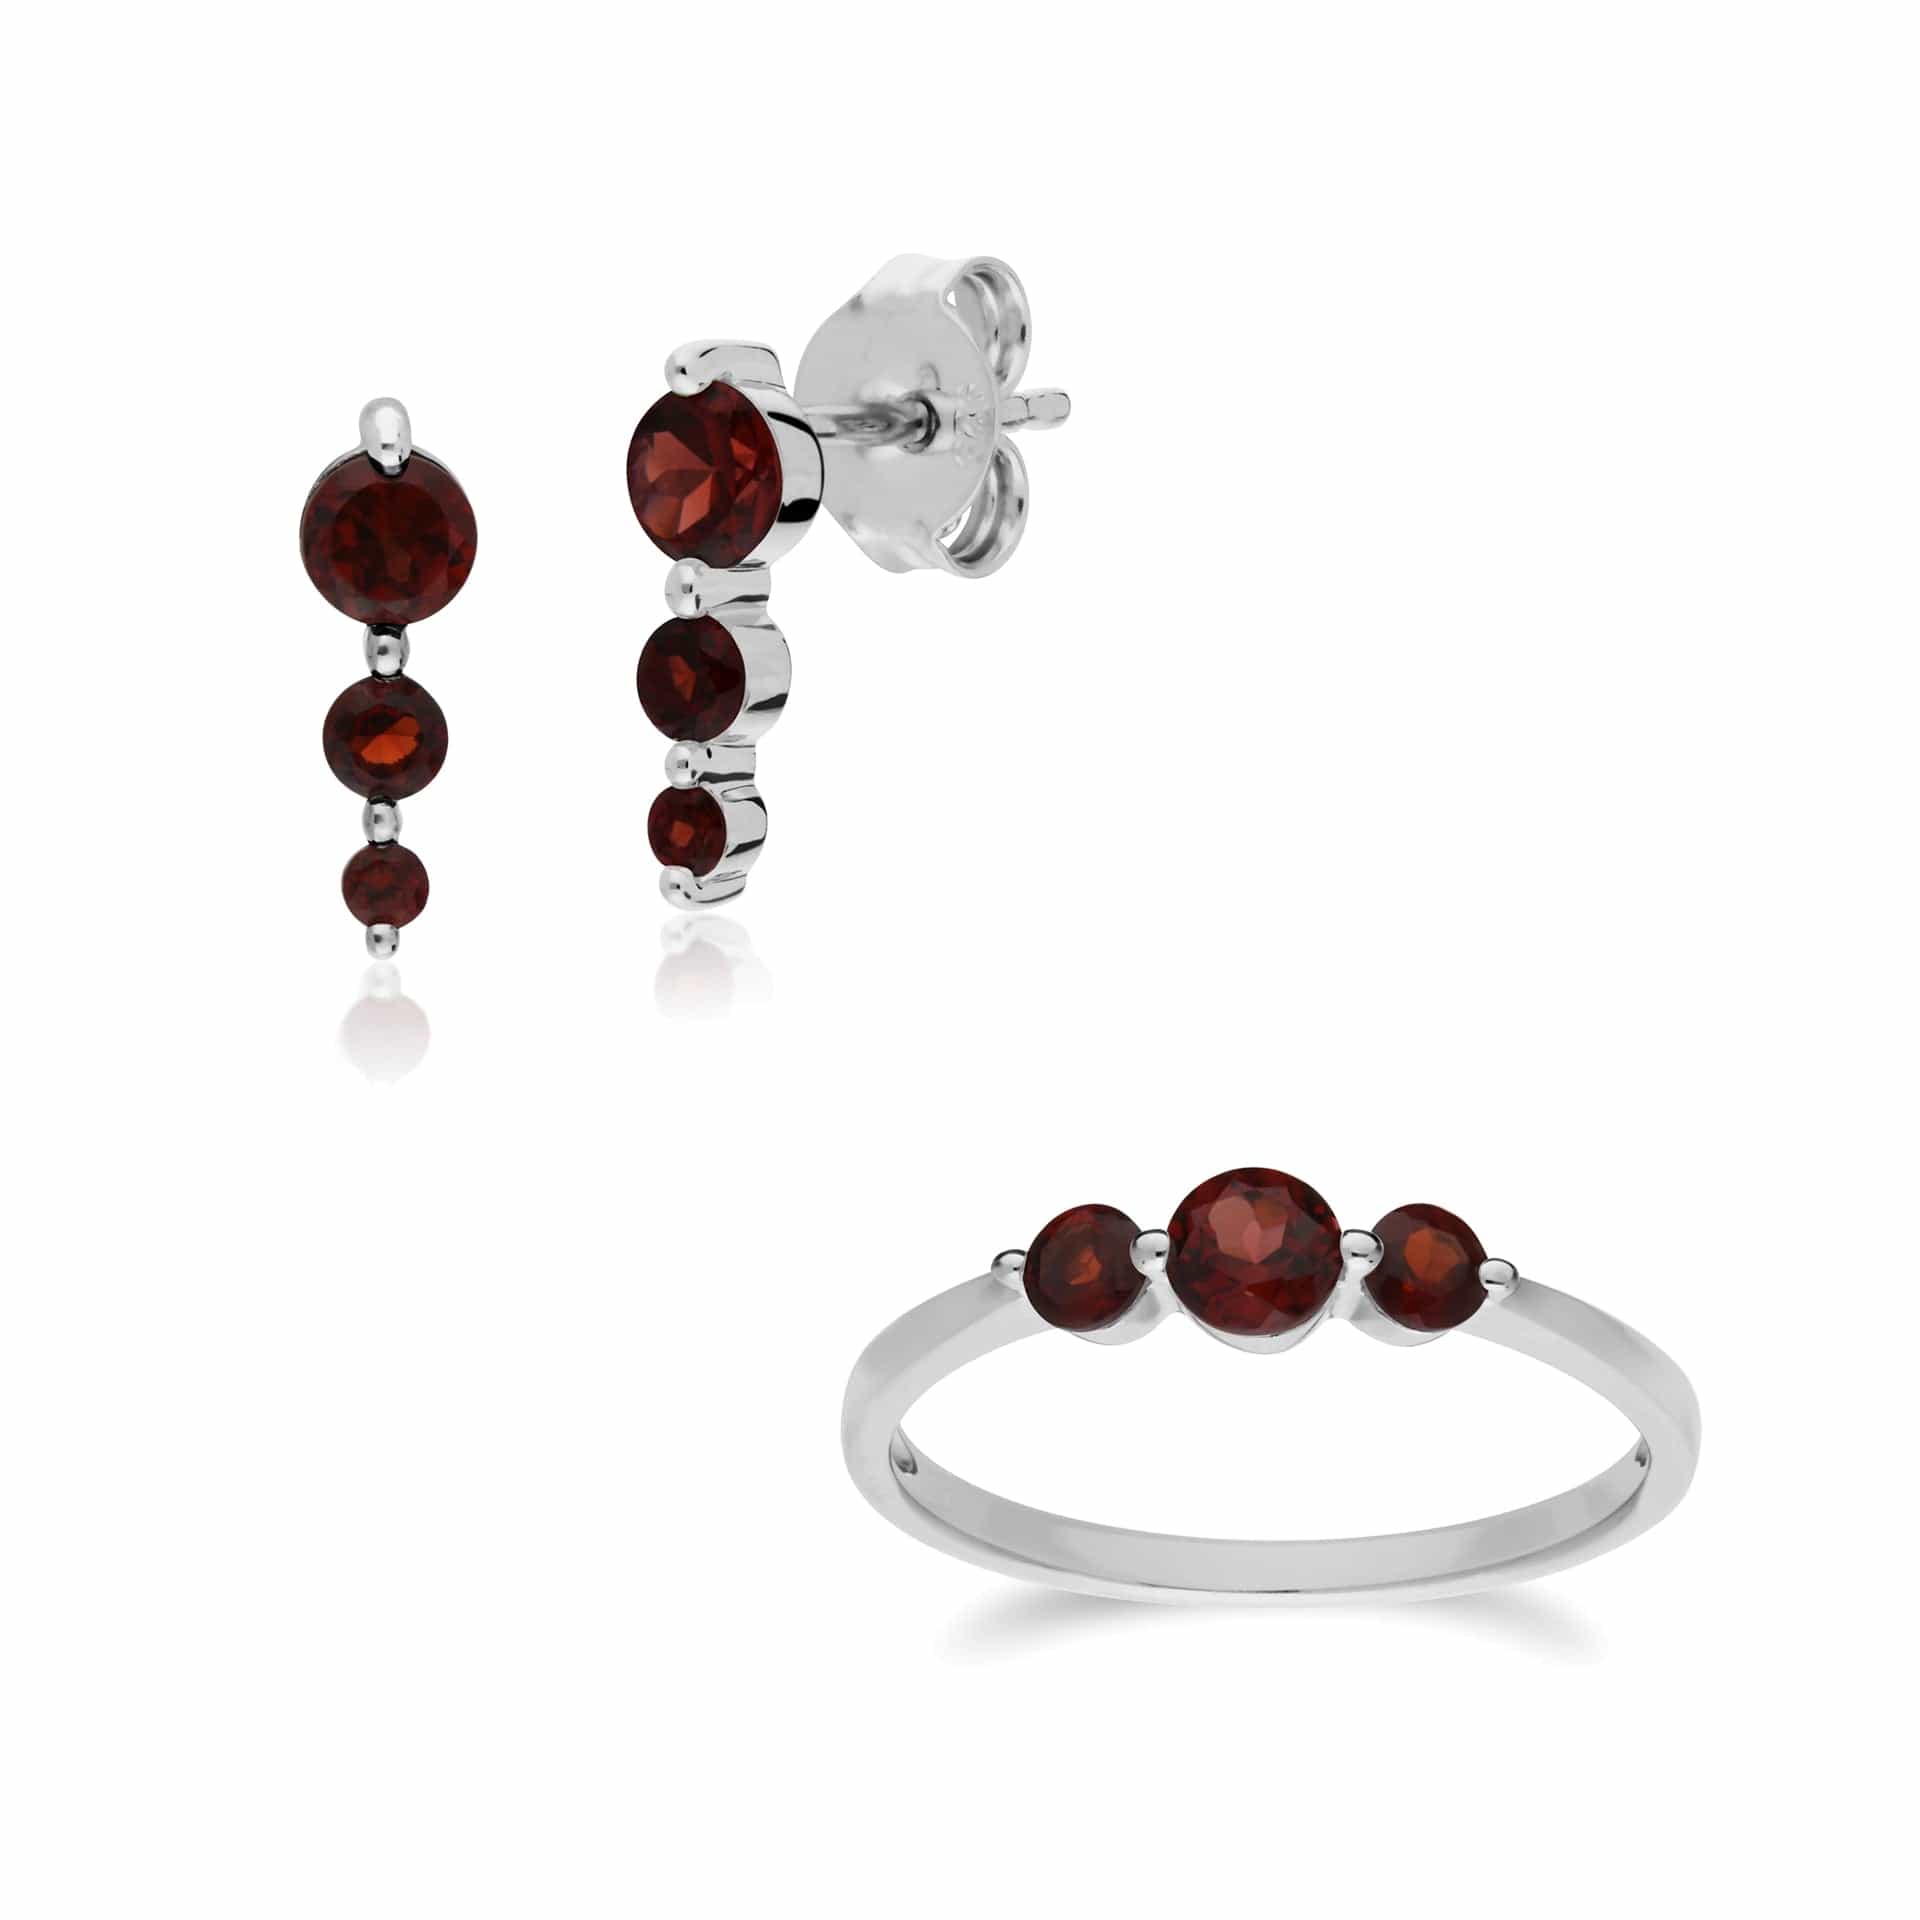 270E025502925-270R056002925 Classic Round Garnet Three Stone Gradient Earrings & Ring Set in 925 Sterling Silver 1